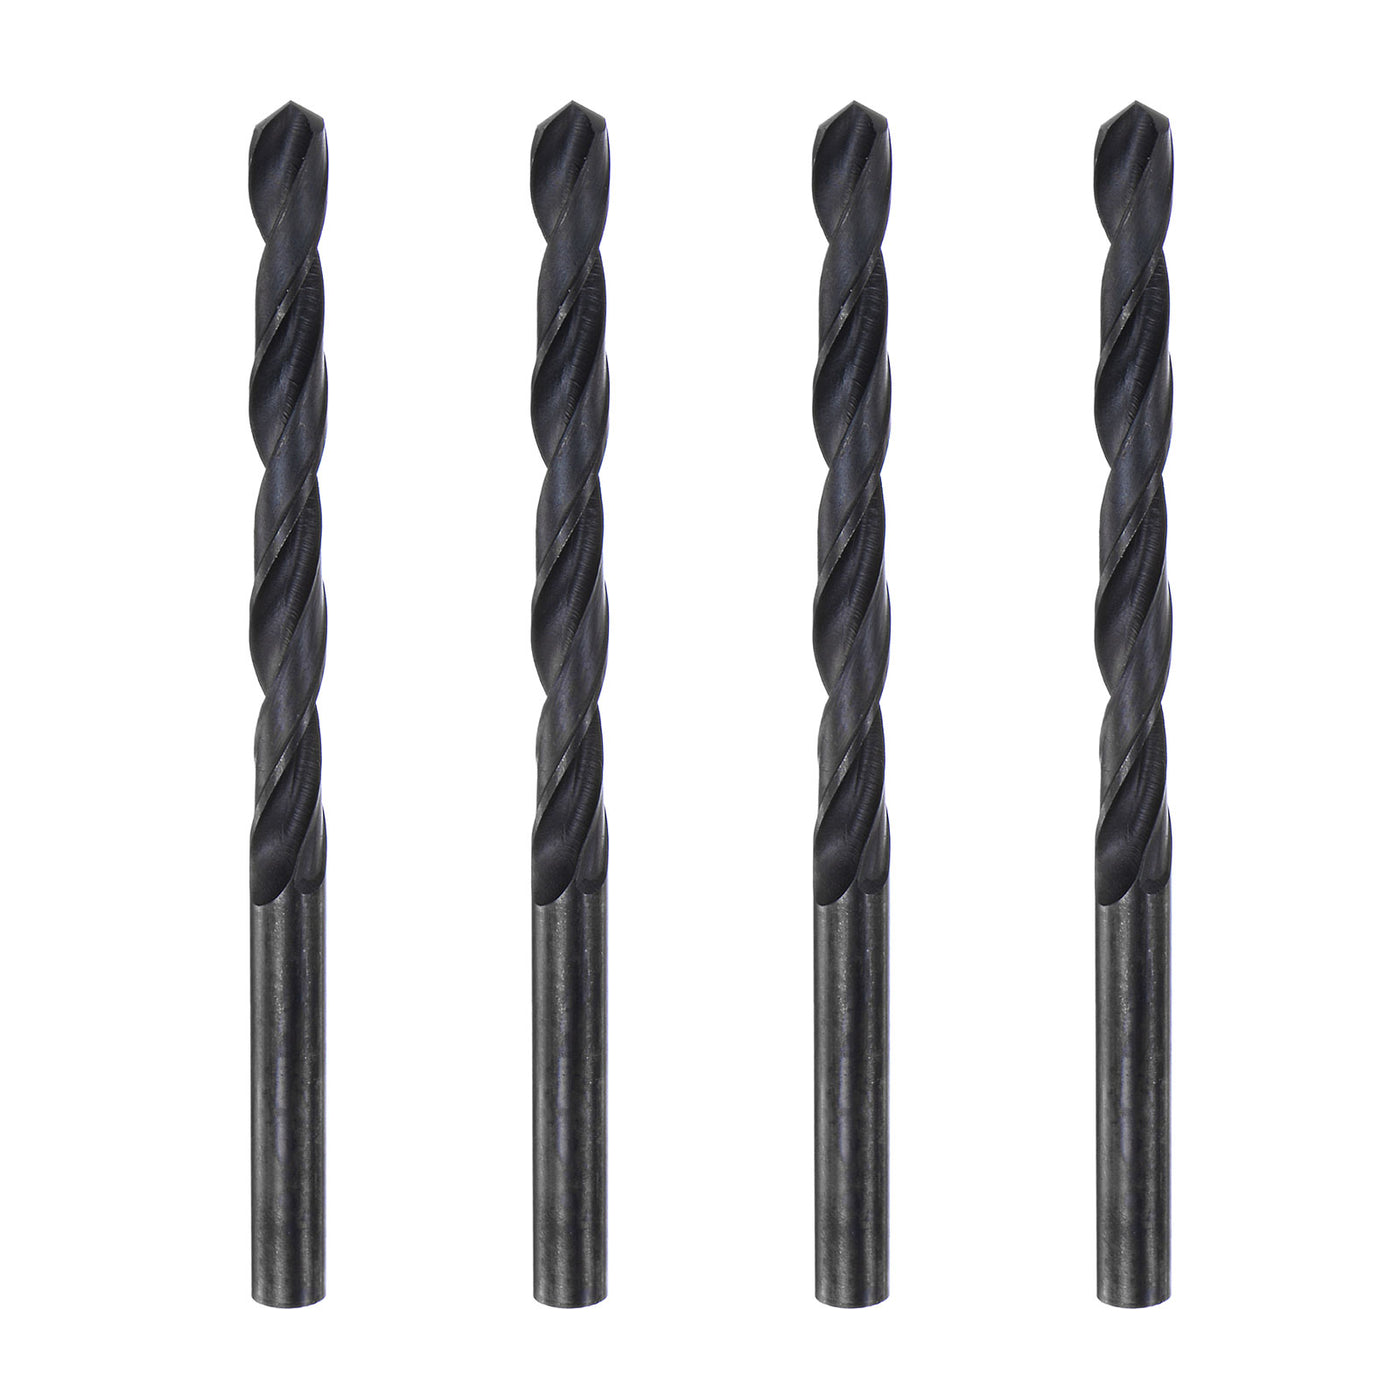 uxcell Uxcell High Speed Steel Twist Drill Bit, 7mm Fully Ground Black Oxide 110mm Long 4Pcs